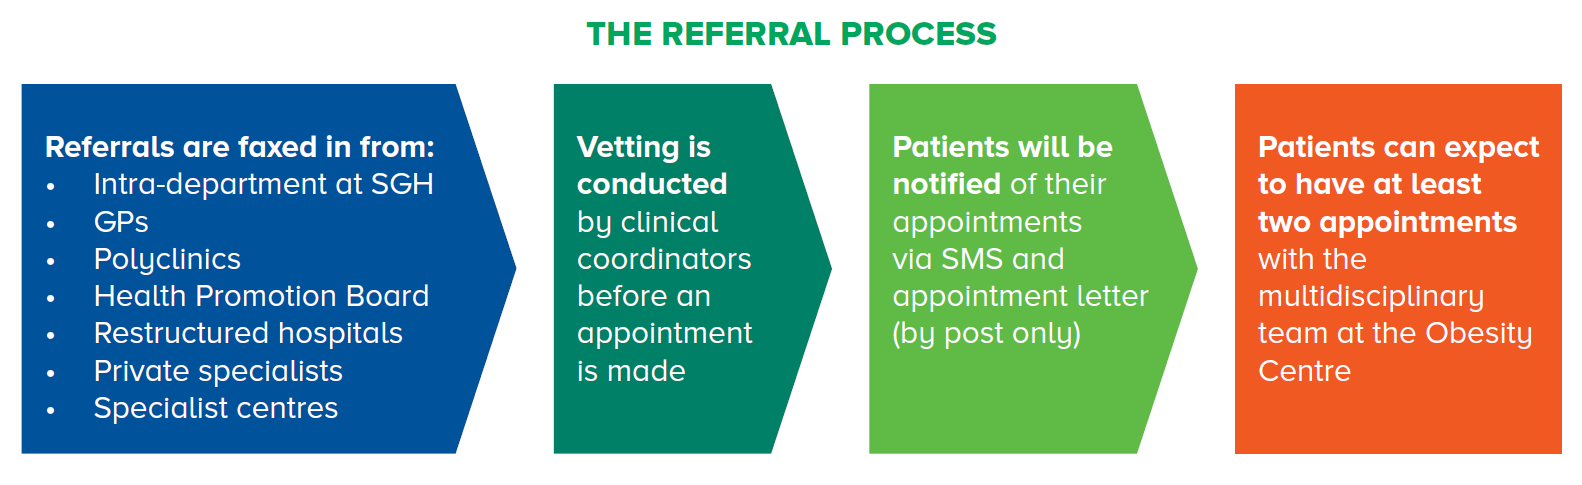 SGH Obesity Centre Referral Process - Singapore General Hospital